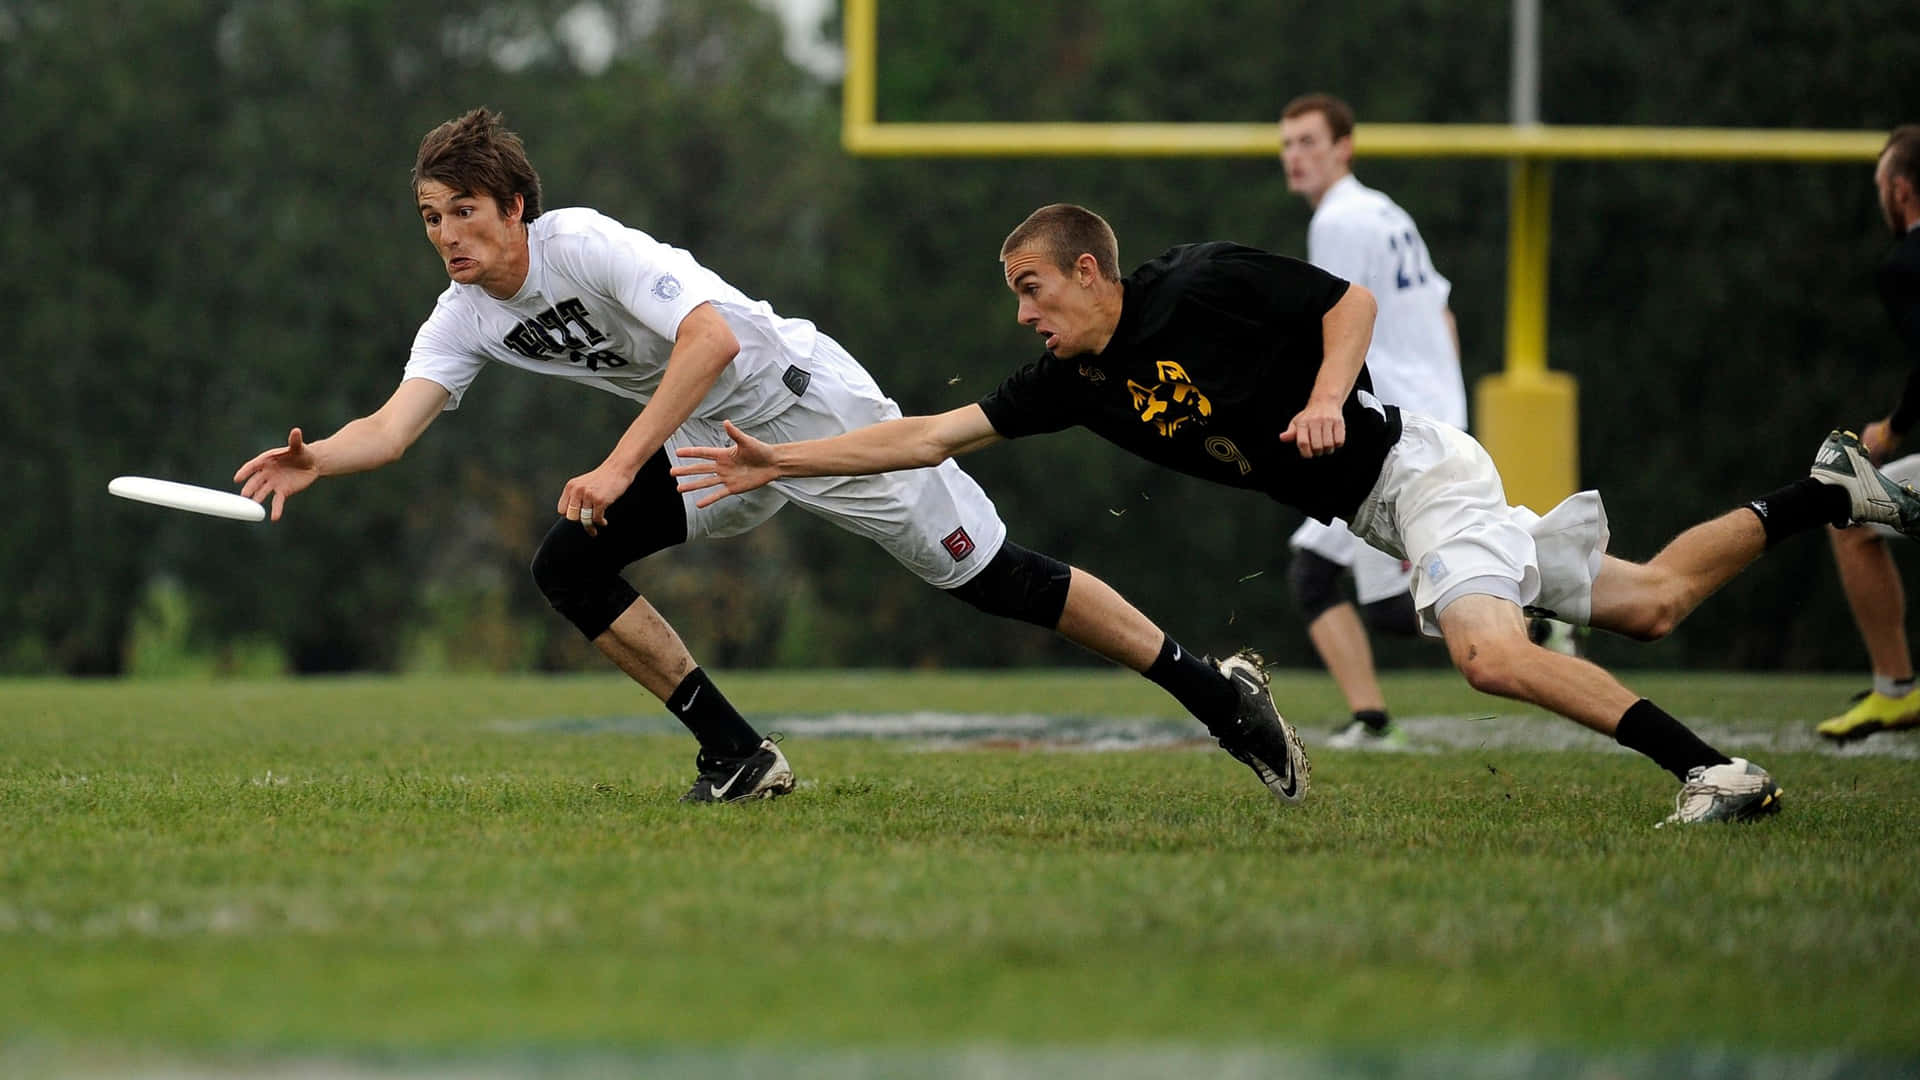 Outrunning Opponents in Ultimate Frisbee